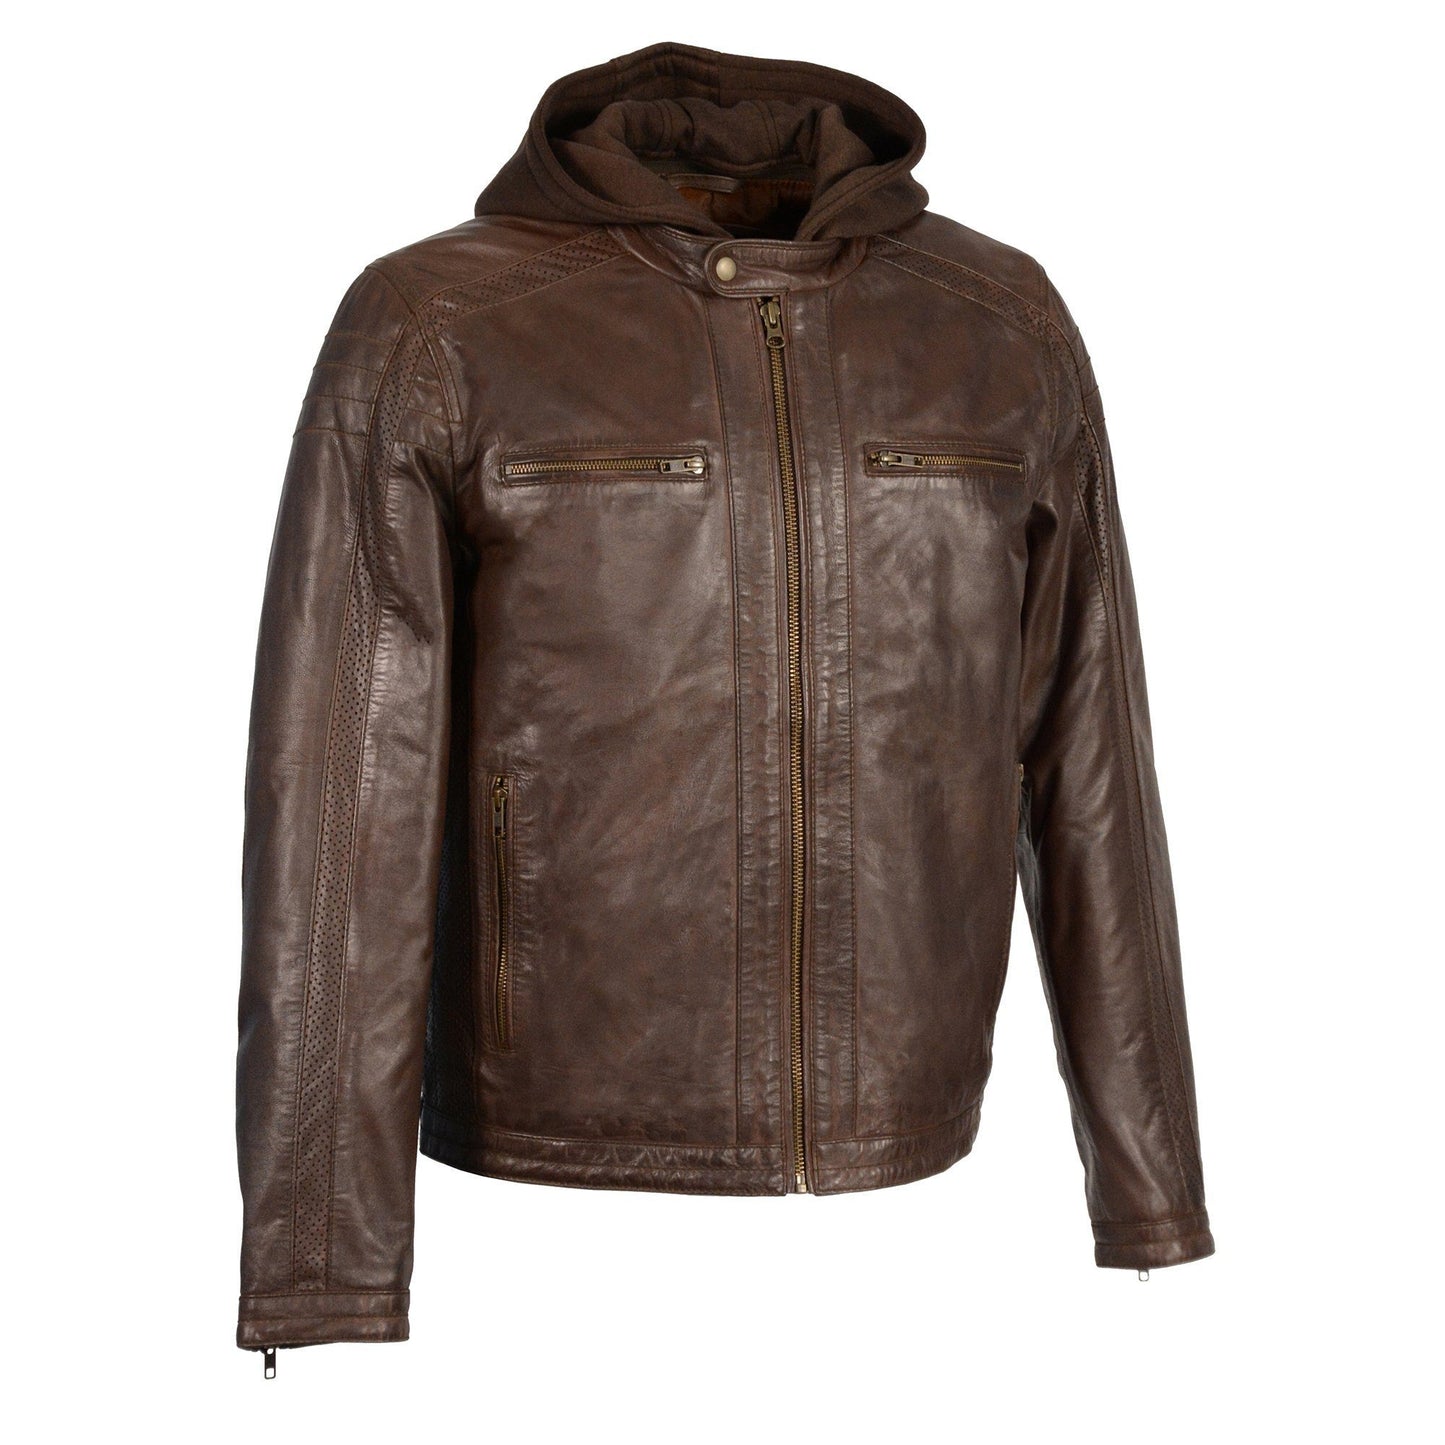 Milwaukee Leather SFM1845 Men's Brown Fashion Casual Leather Jacket with Removable Hoodie